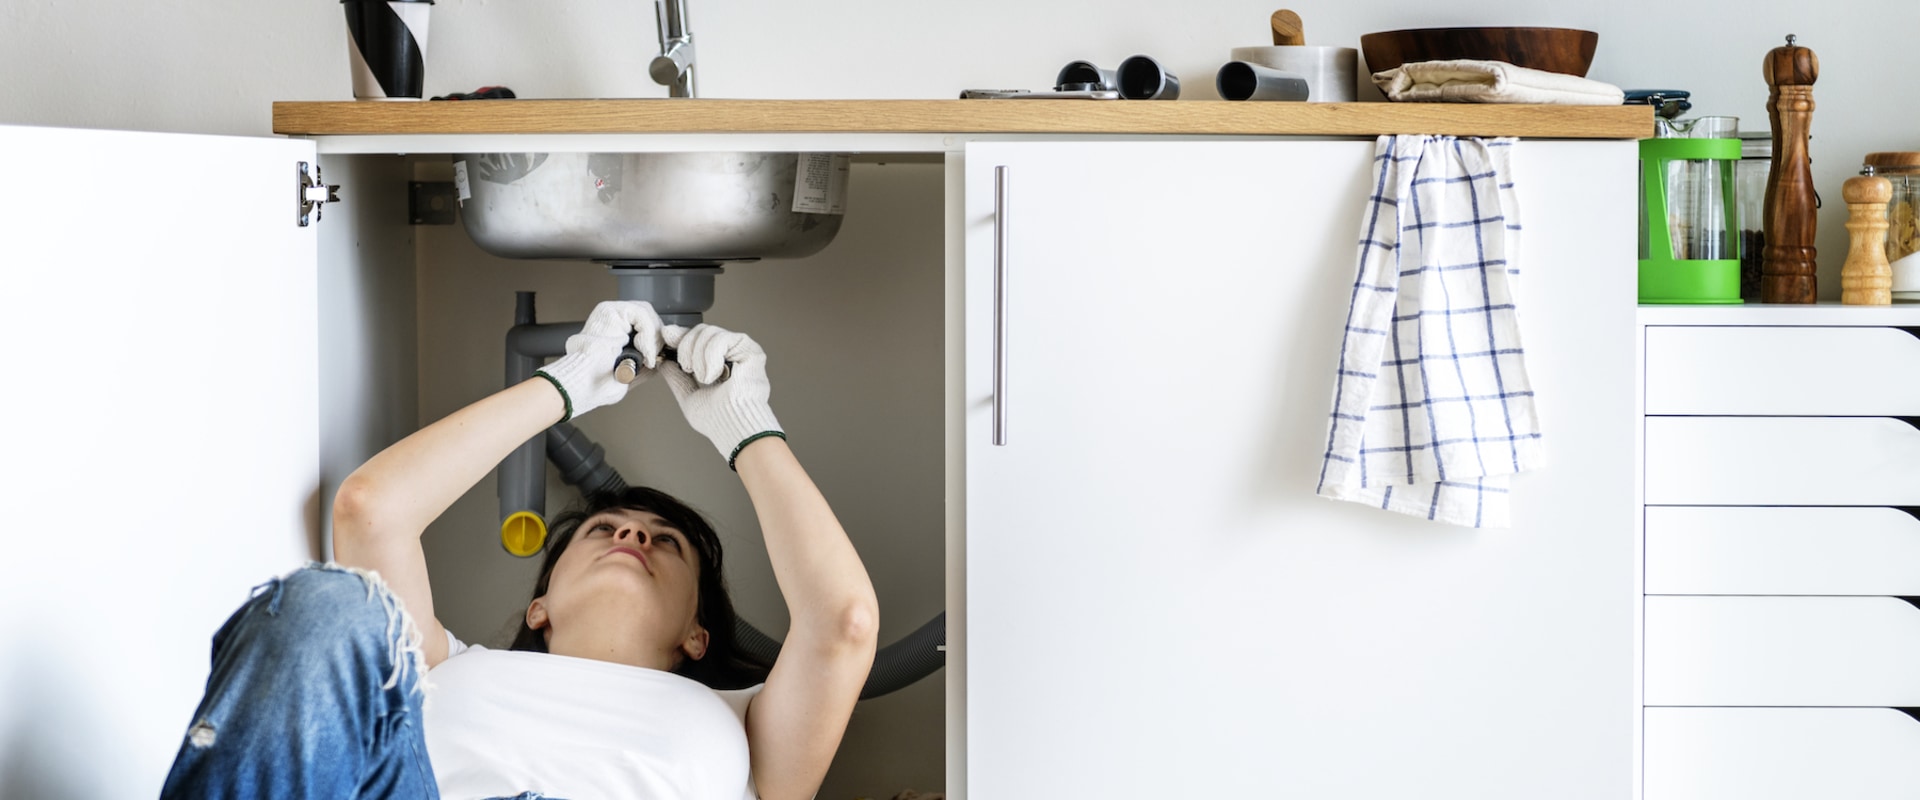 What are the most common household repairs?